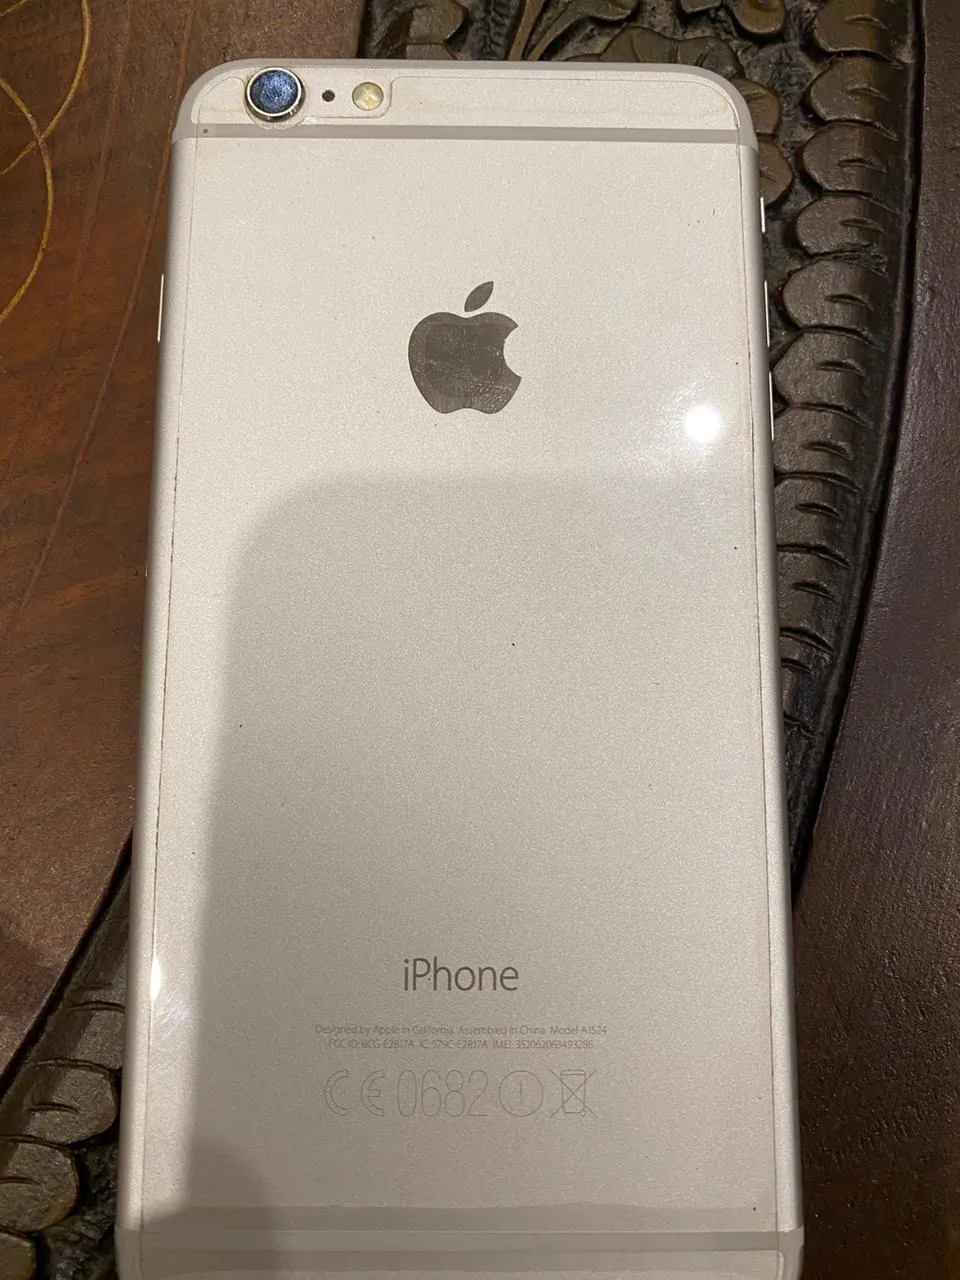 Iphone 6+ (64GB) for sale - photo 1